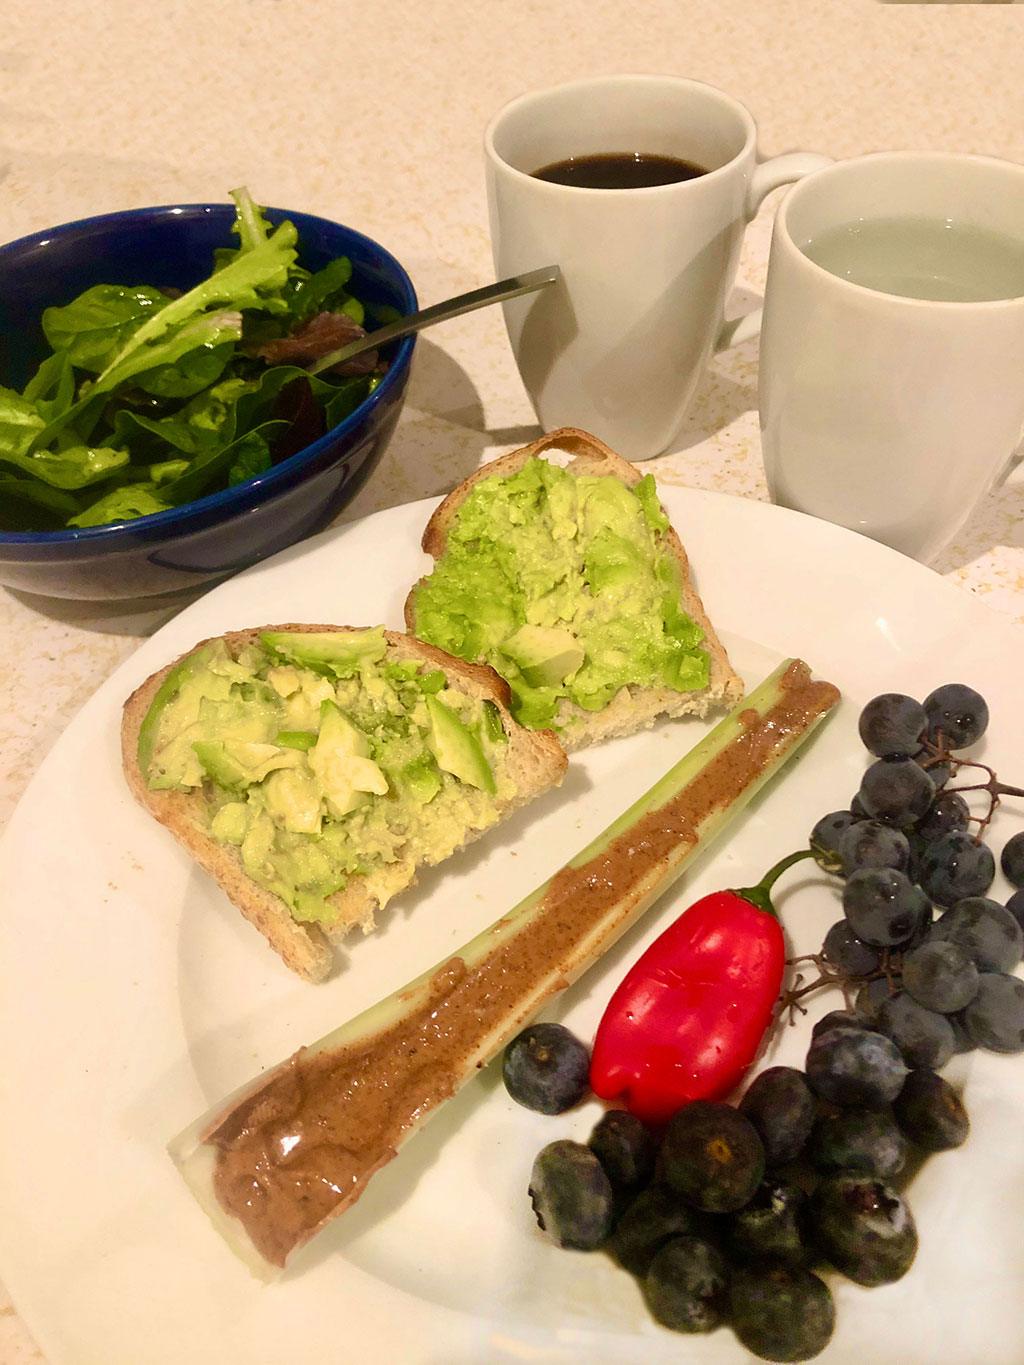 Avocado toast and peanut butter on celery is a great breakfast for the Add-In Diet